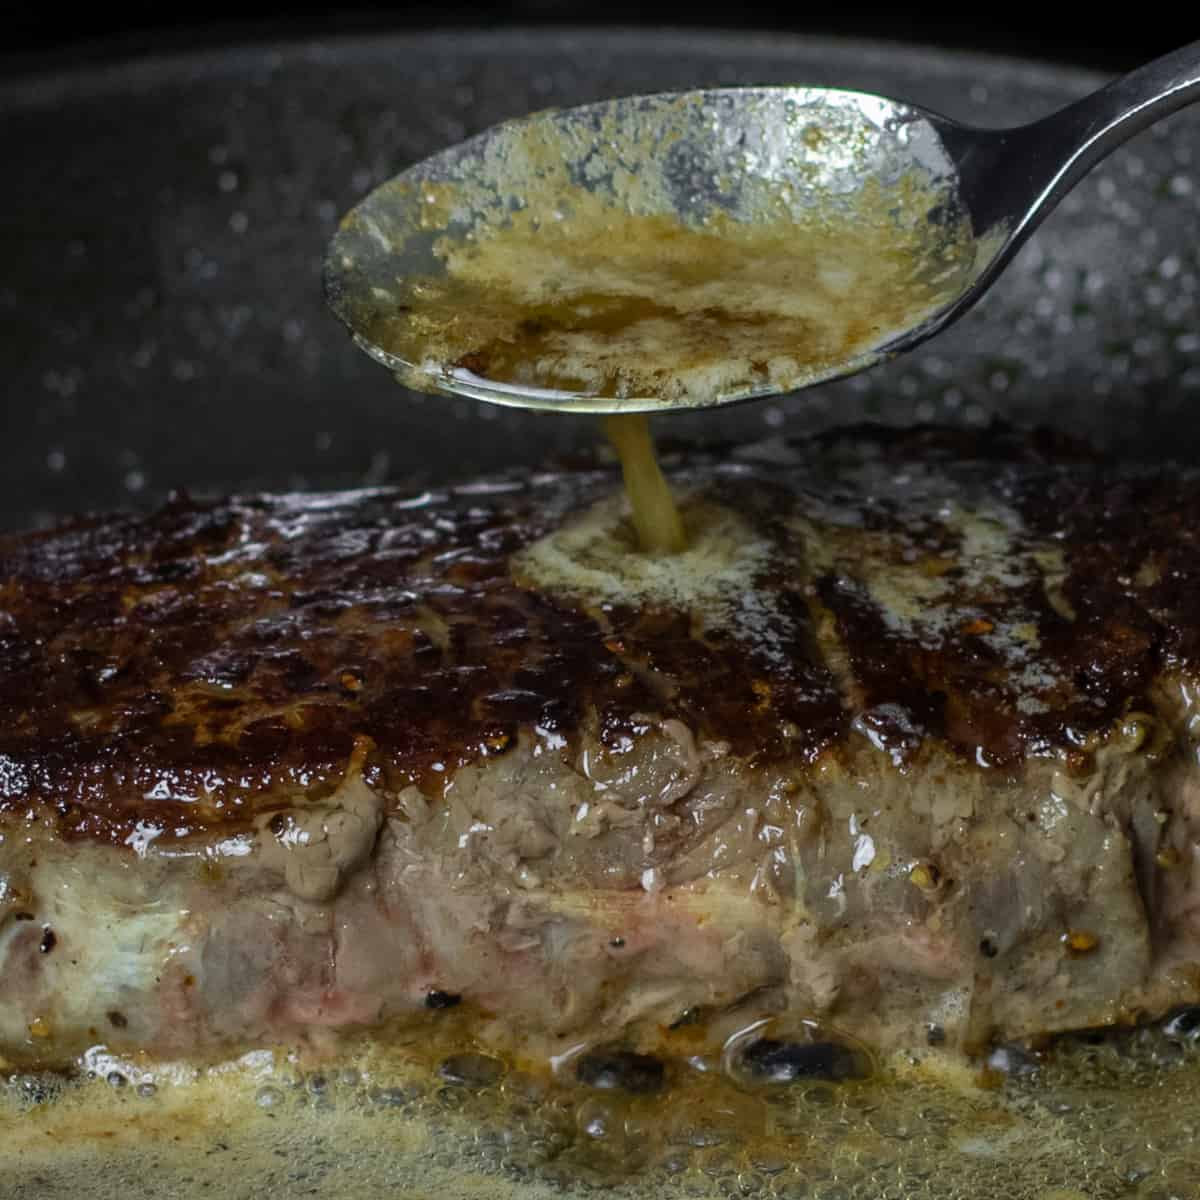 Melted butter being spooned over a steak cooking in a skillet.